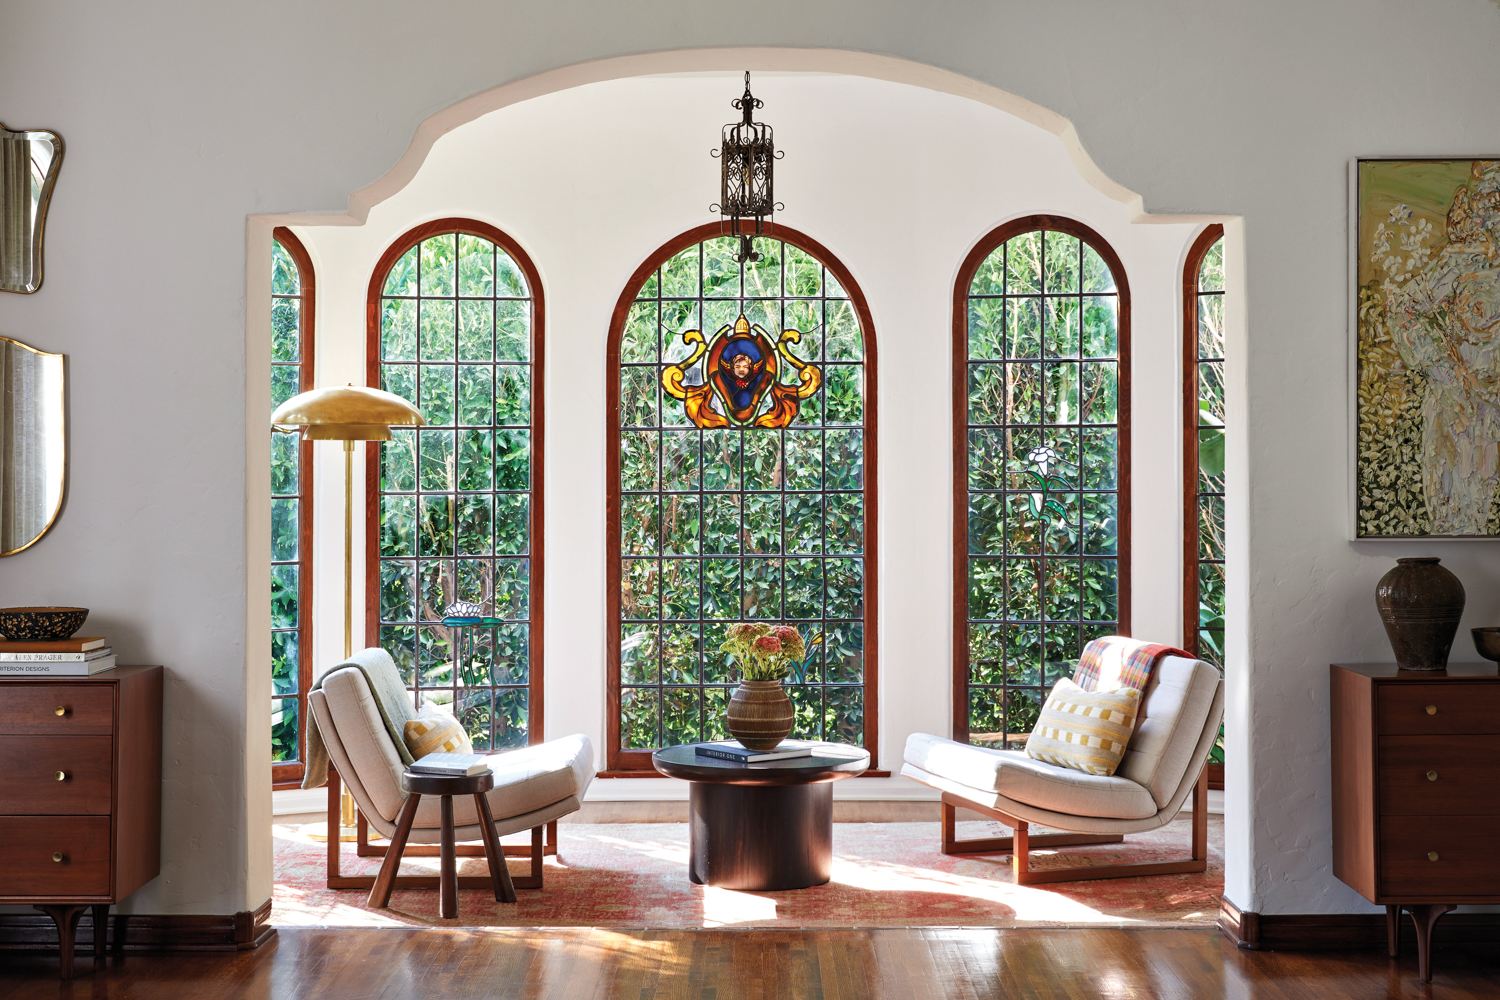 living room of Spanish-style home with stained-glass windows and two chairs and table